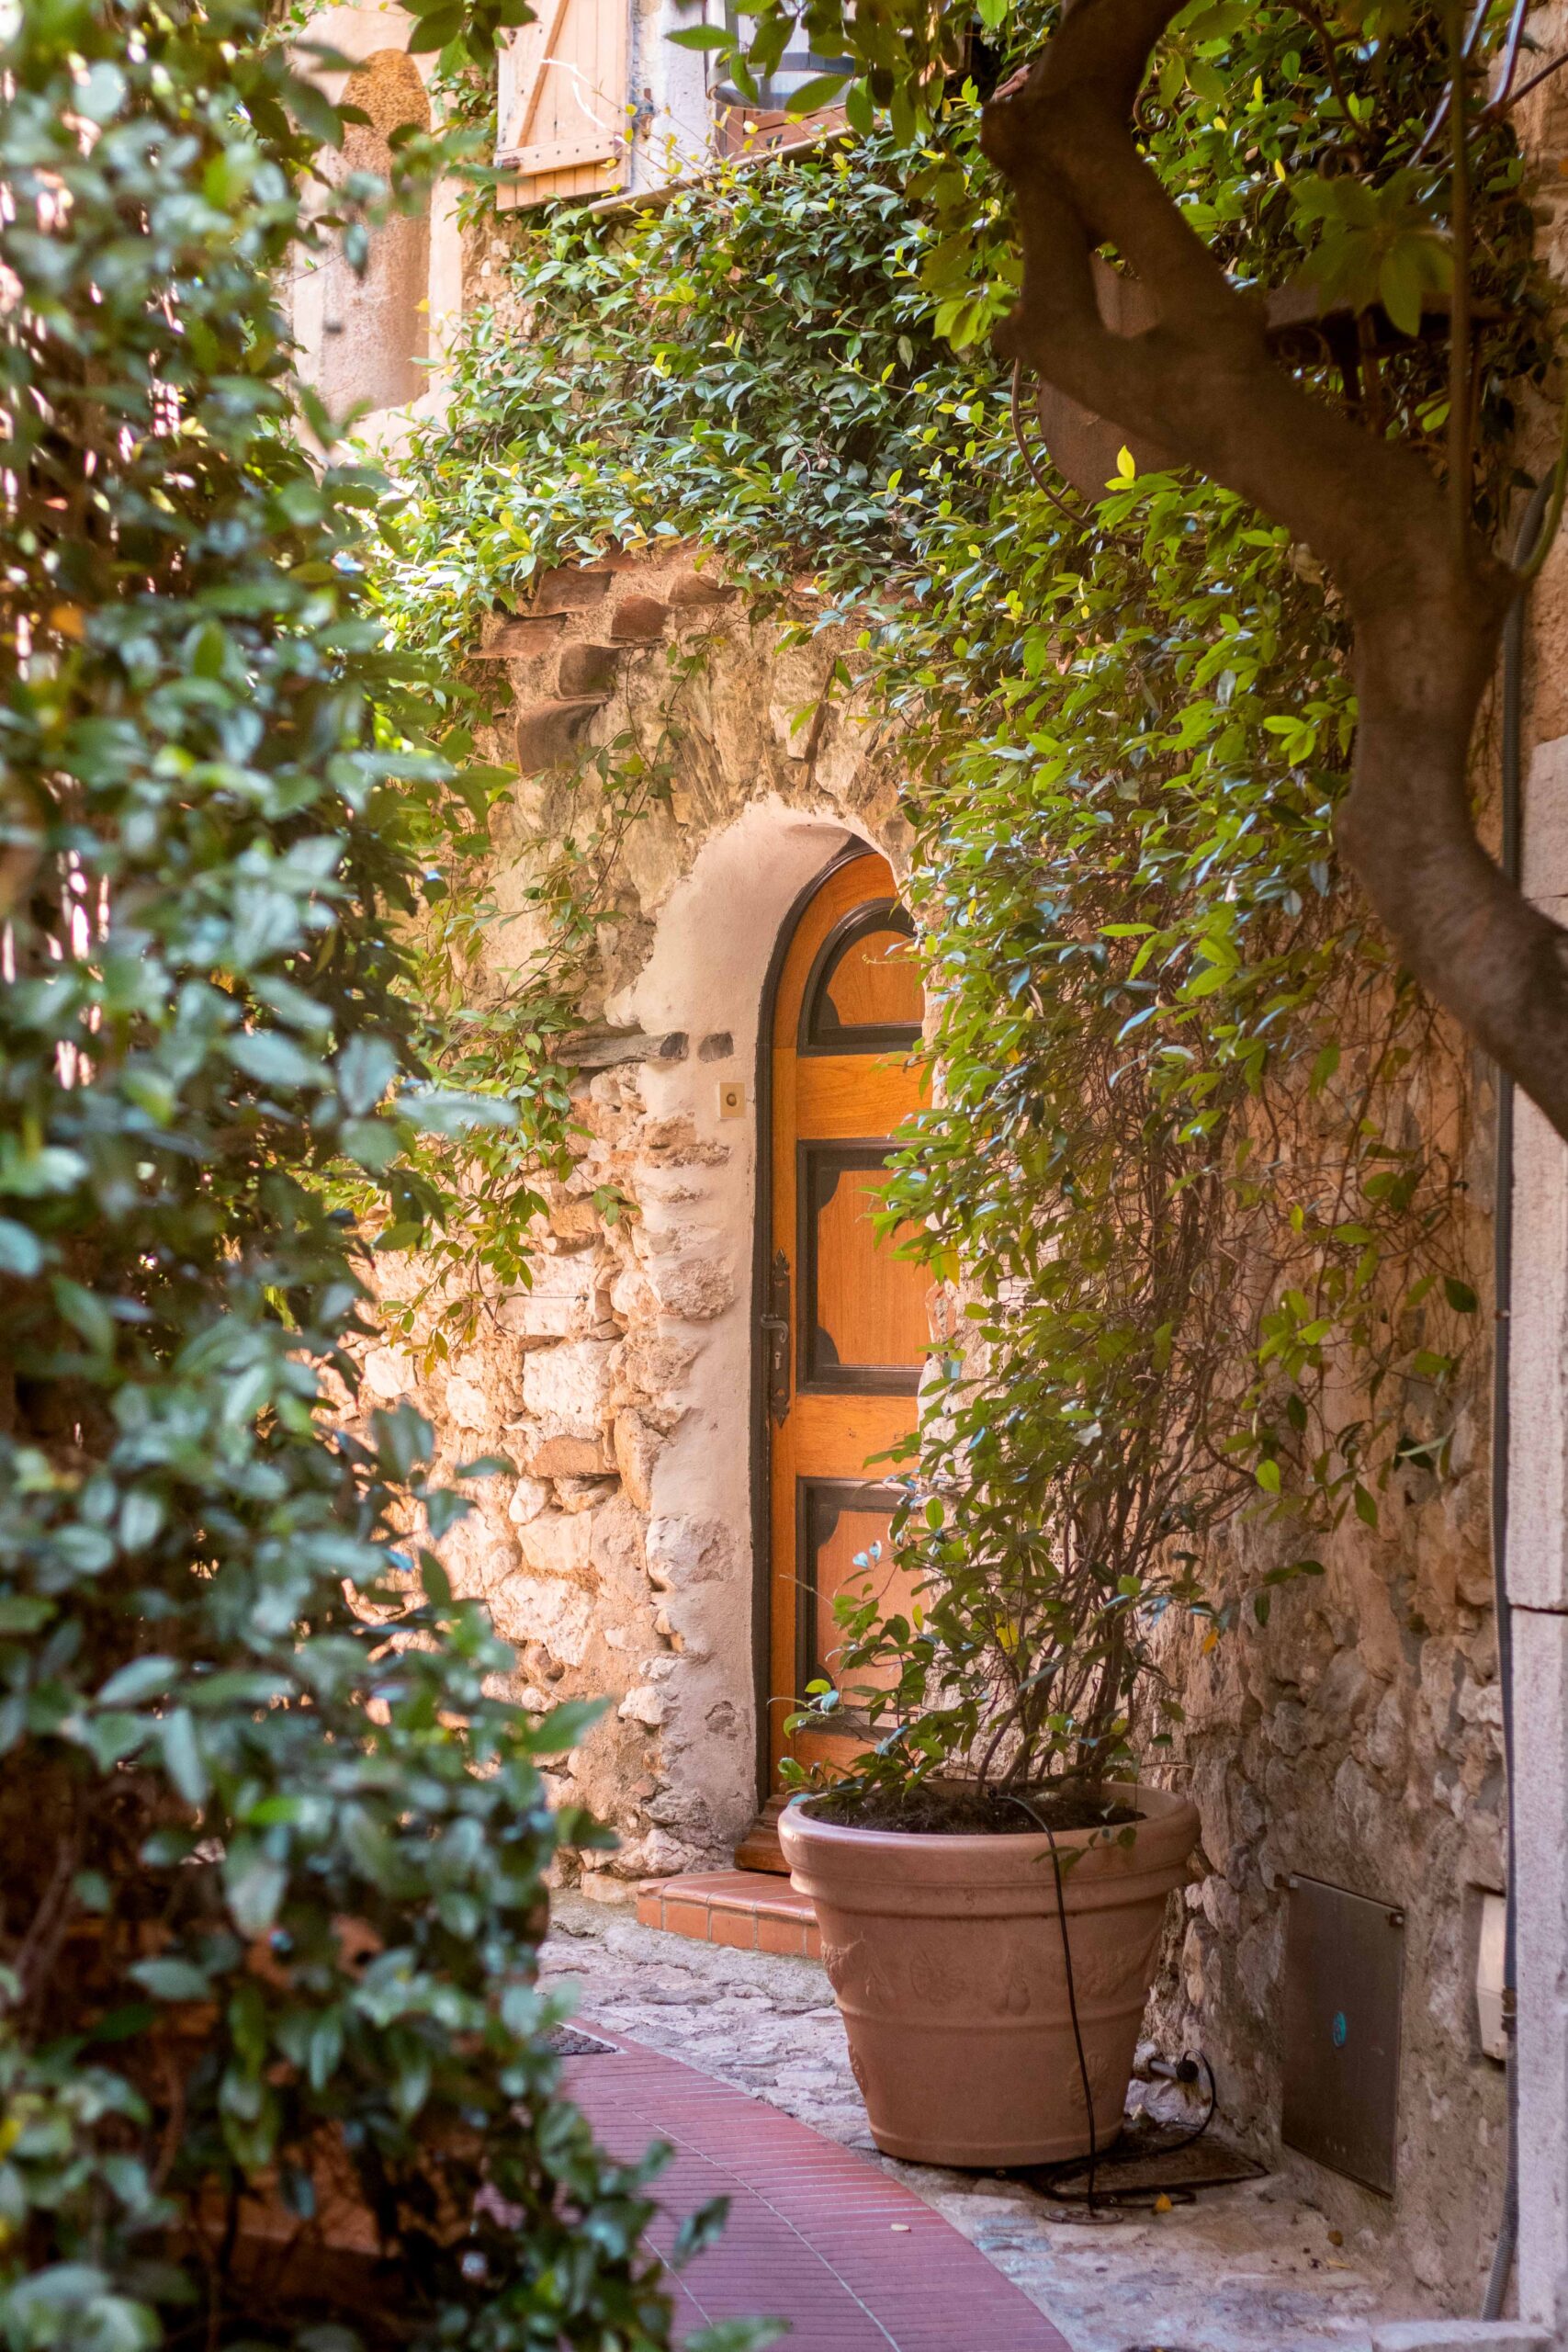 Small empty cobblestone street featuring potted plants and wooden door in Eze Village, France